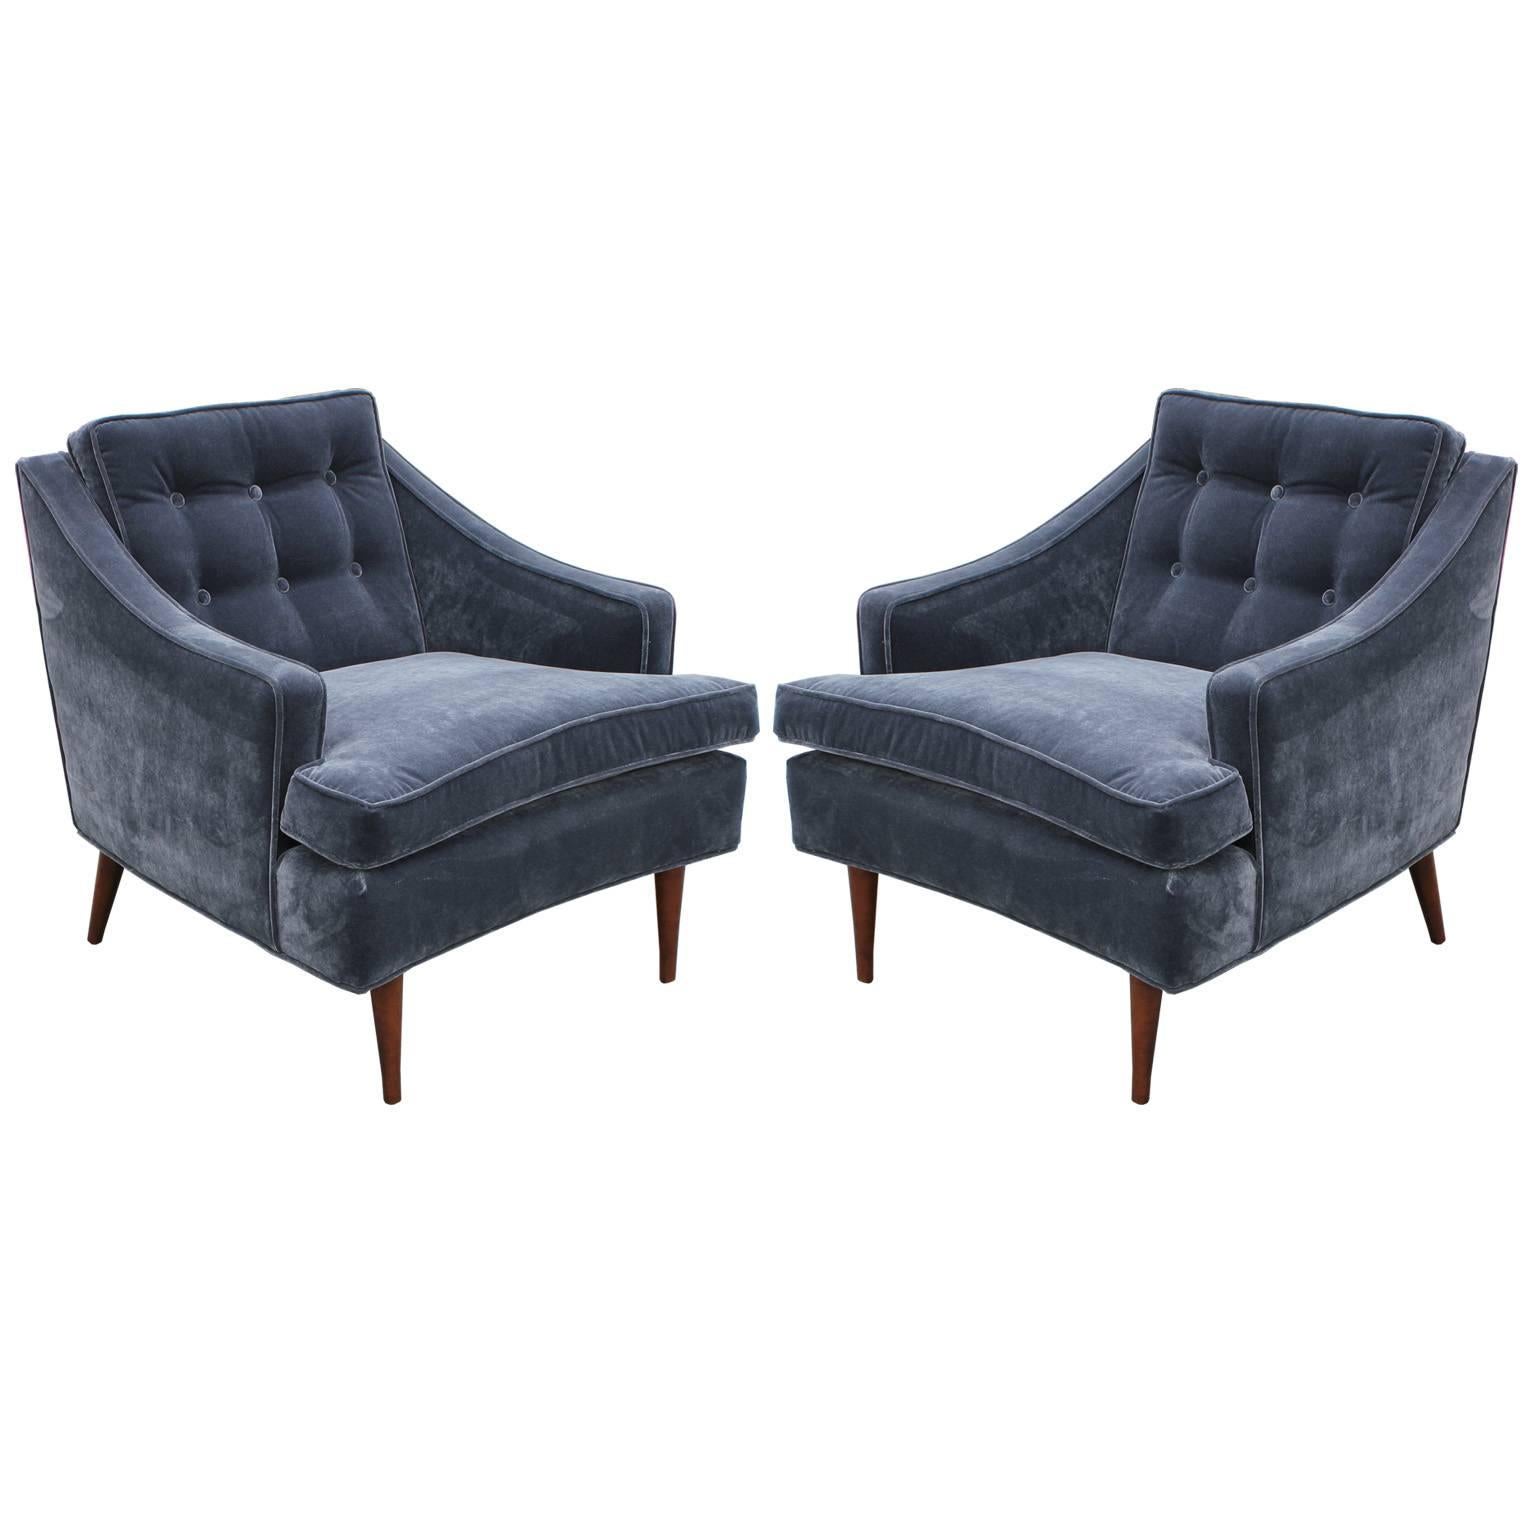 Wonderful Pair of Curved Grey Velvet Tufted Lounge Chairs